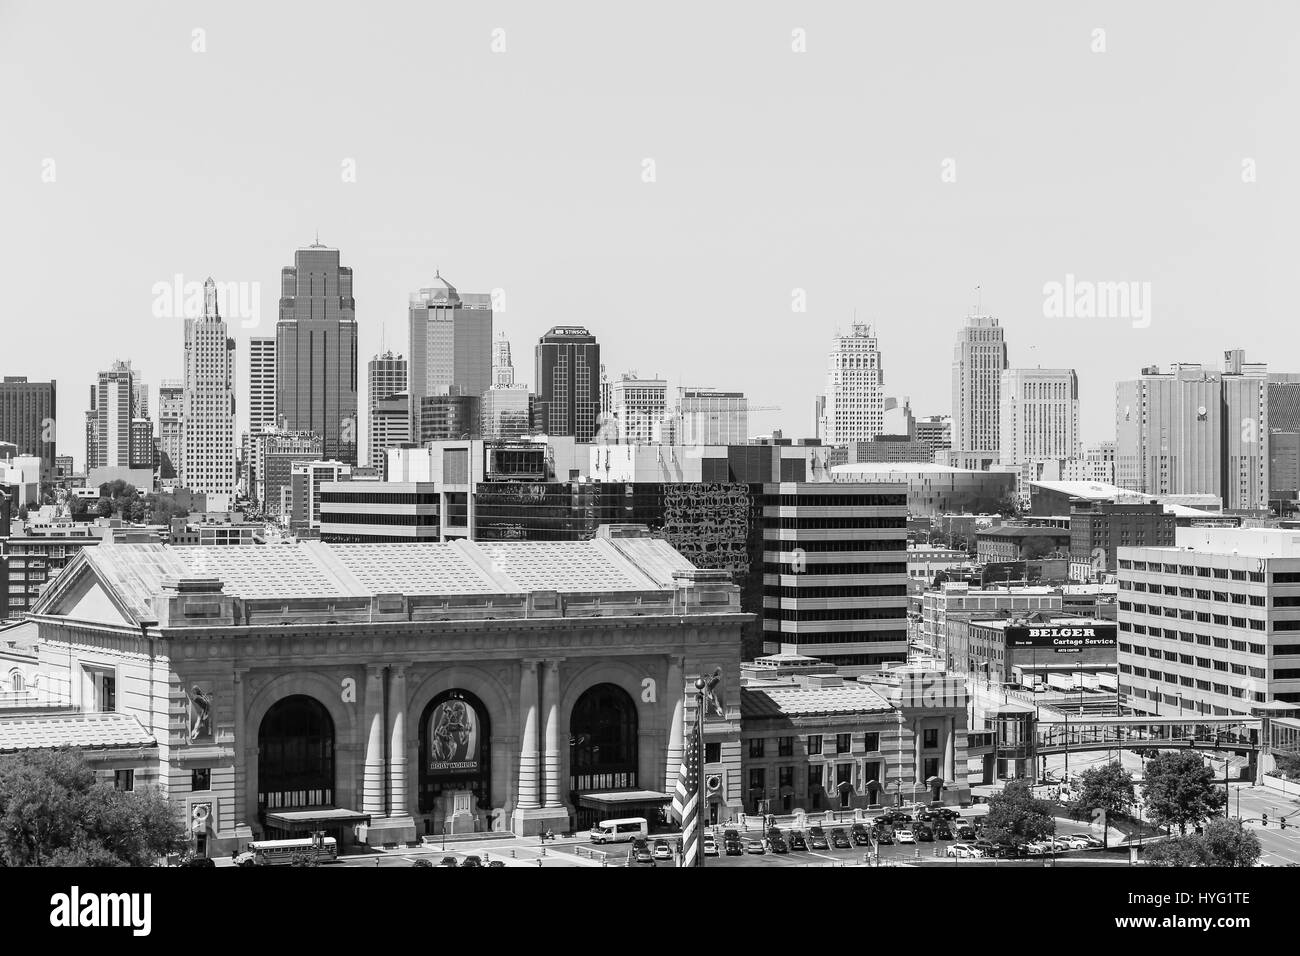 Kansas City, USA - May 21, 2016: Kansas City Union Station with the skyline in the back seen from the National World War I Museum and Memorial. The pi Stock Photo